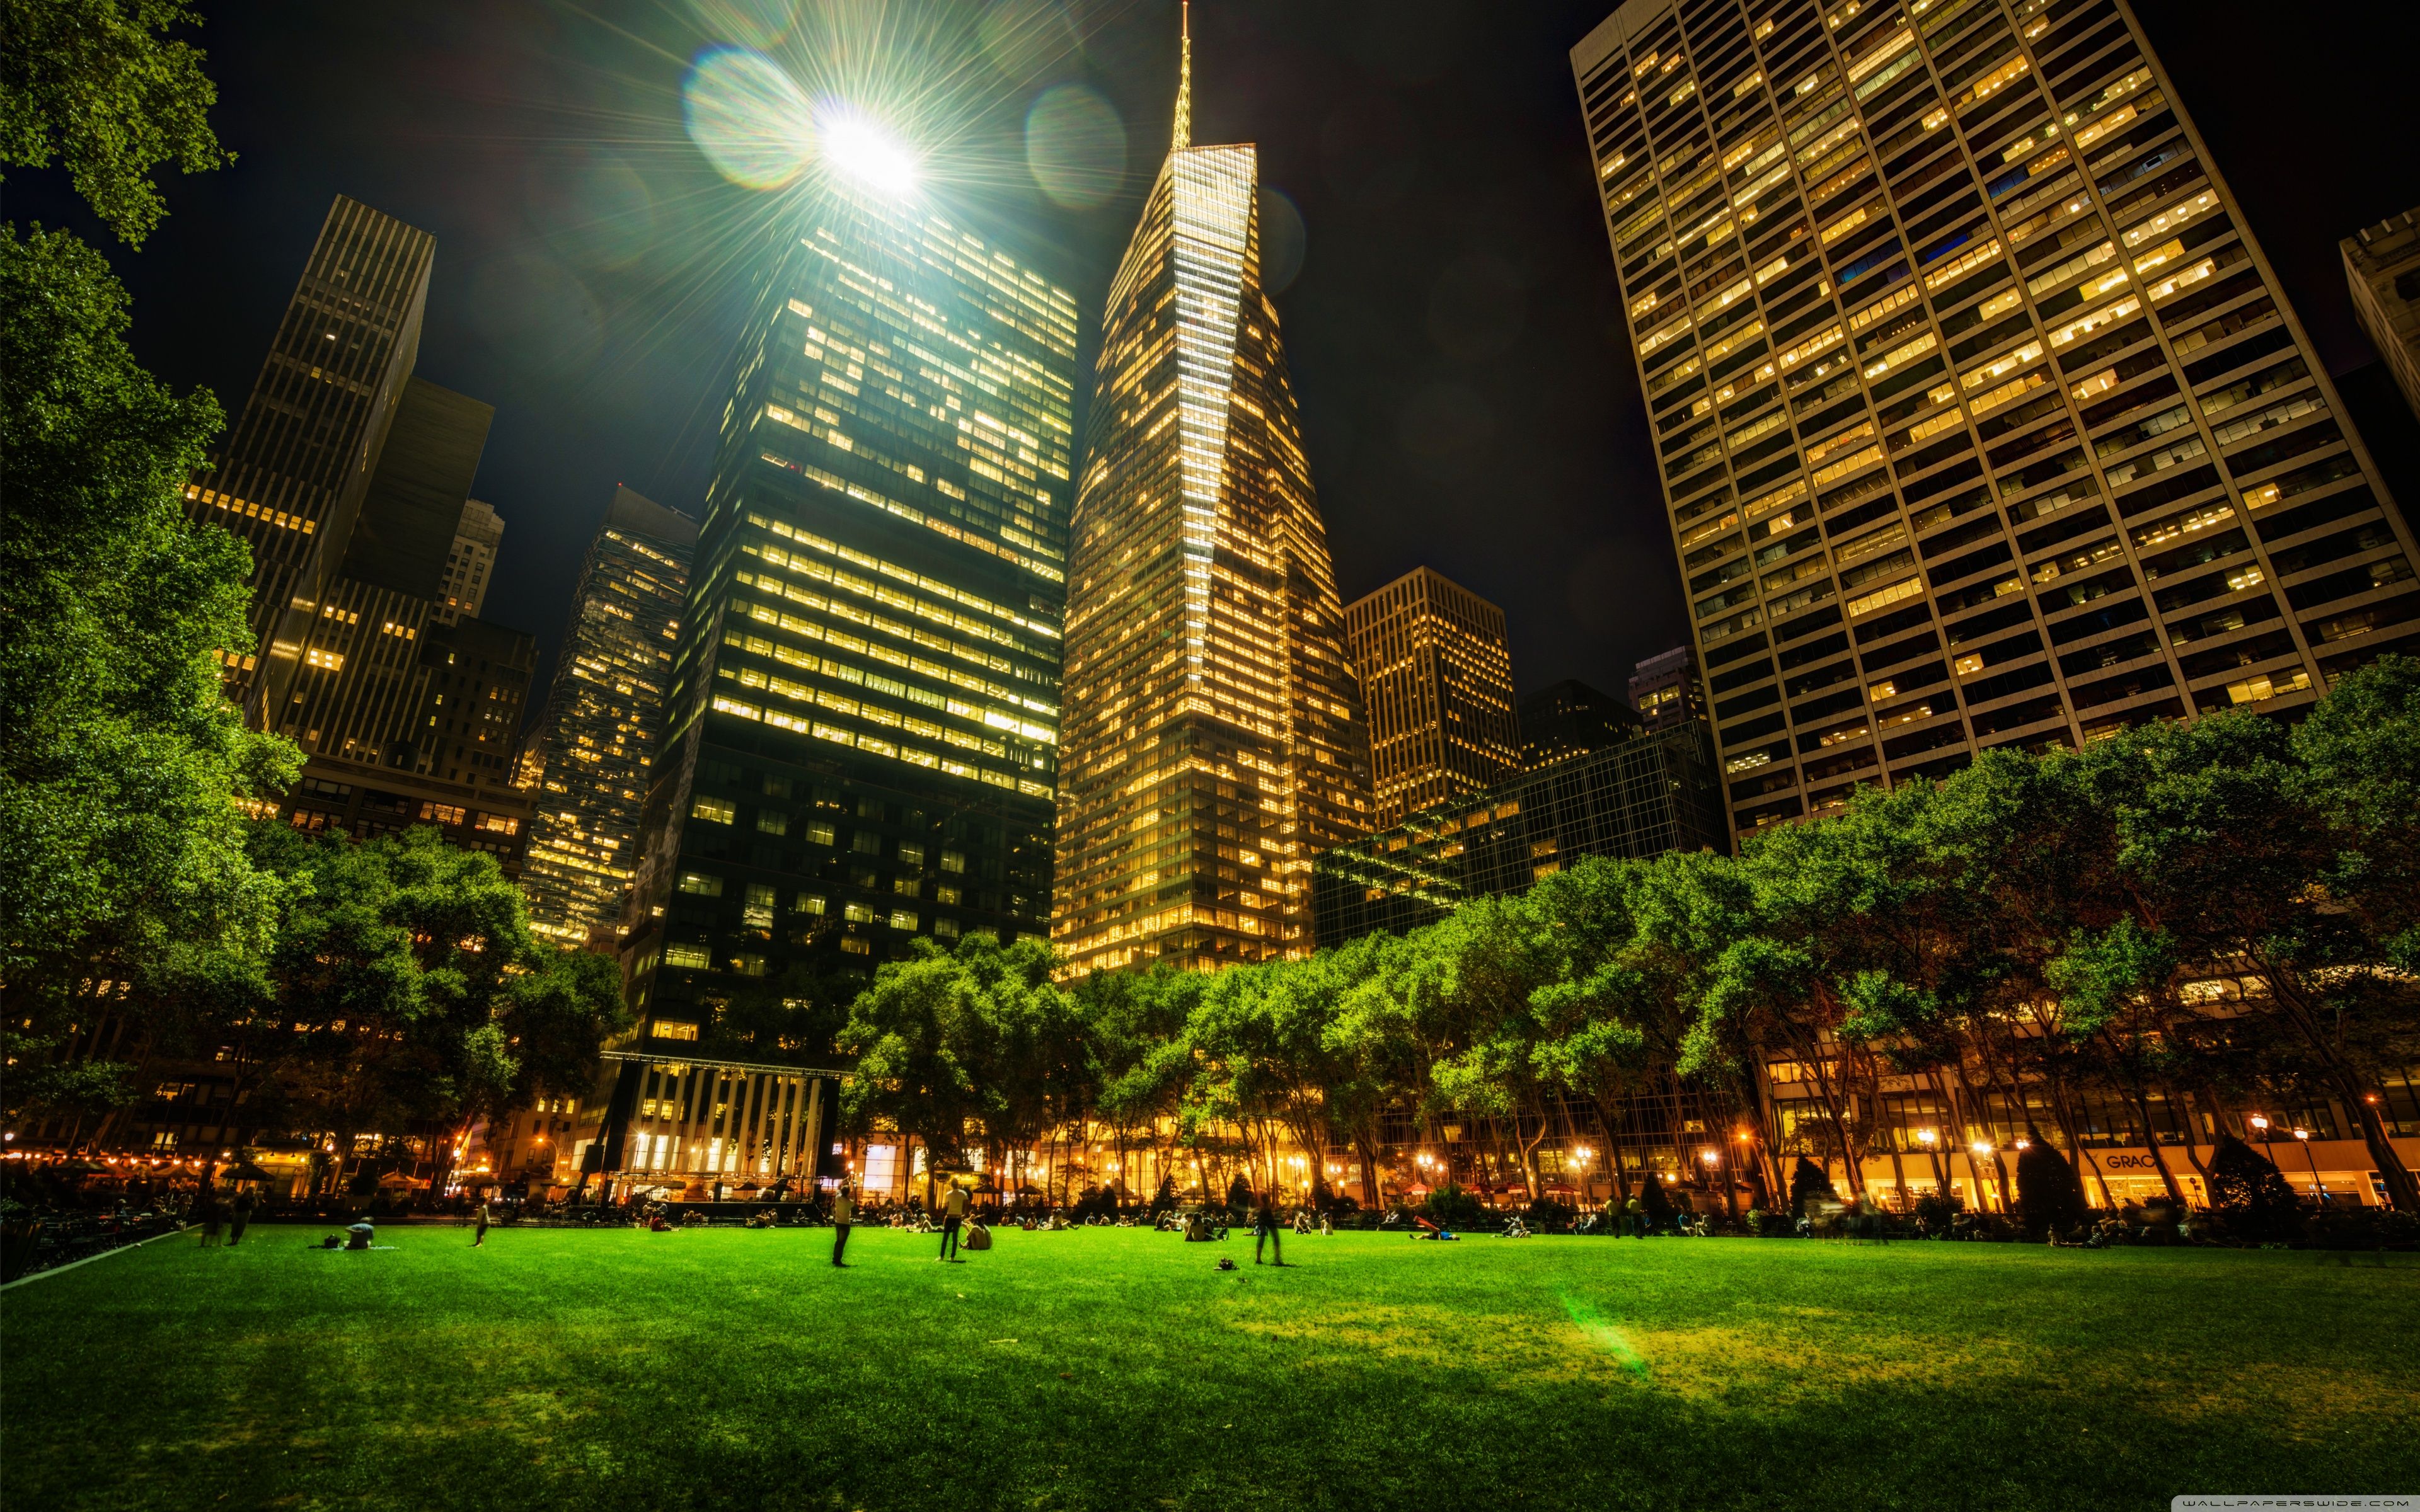 Bryant Park in New York City Ultra HD Desktop Background Wallpaper for: Multi Display, Dual Monitor, Tablet